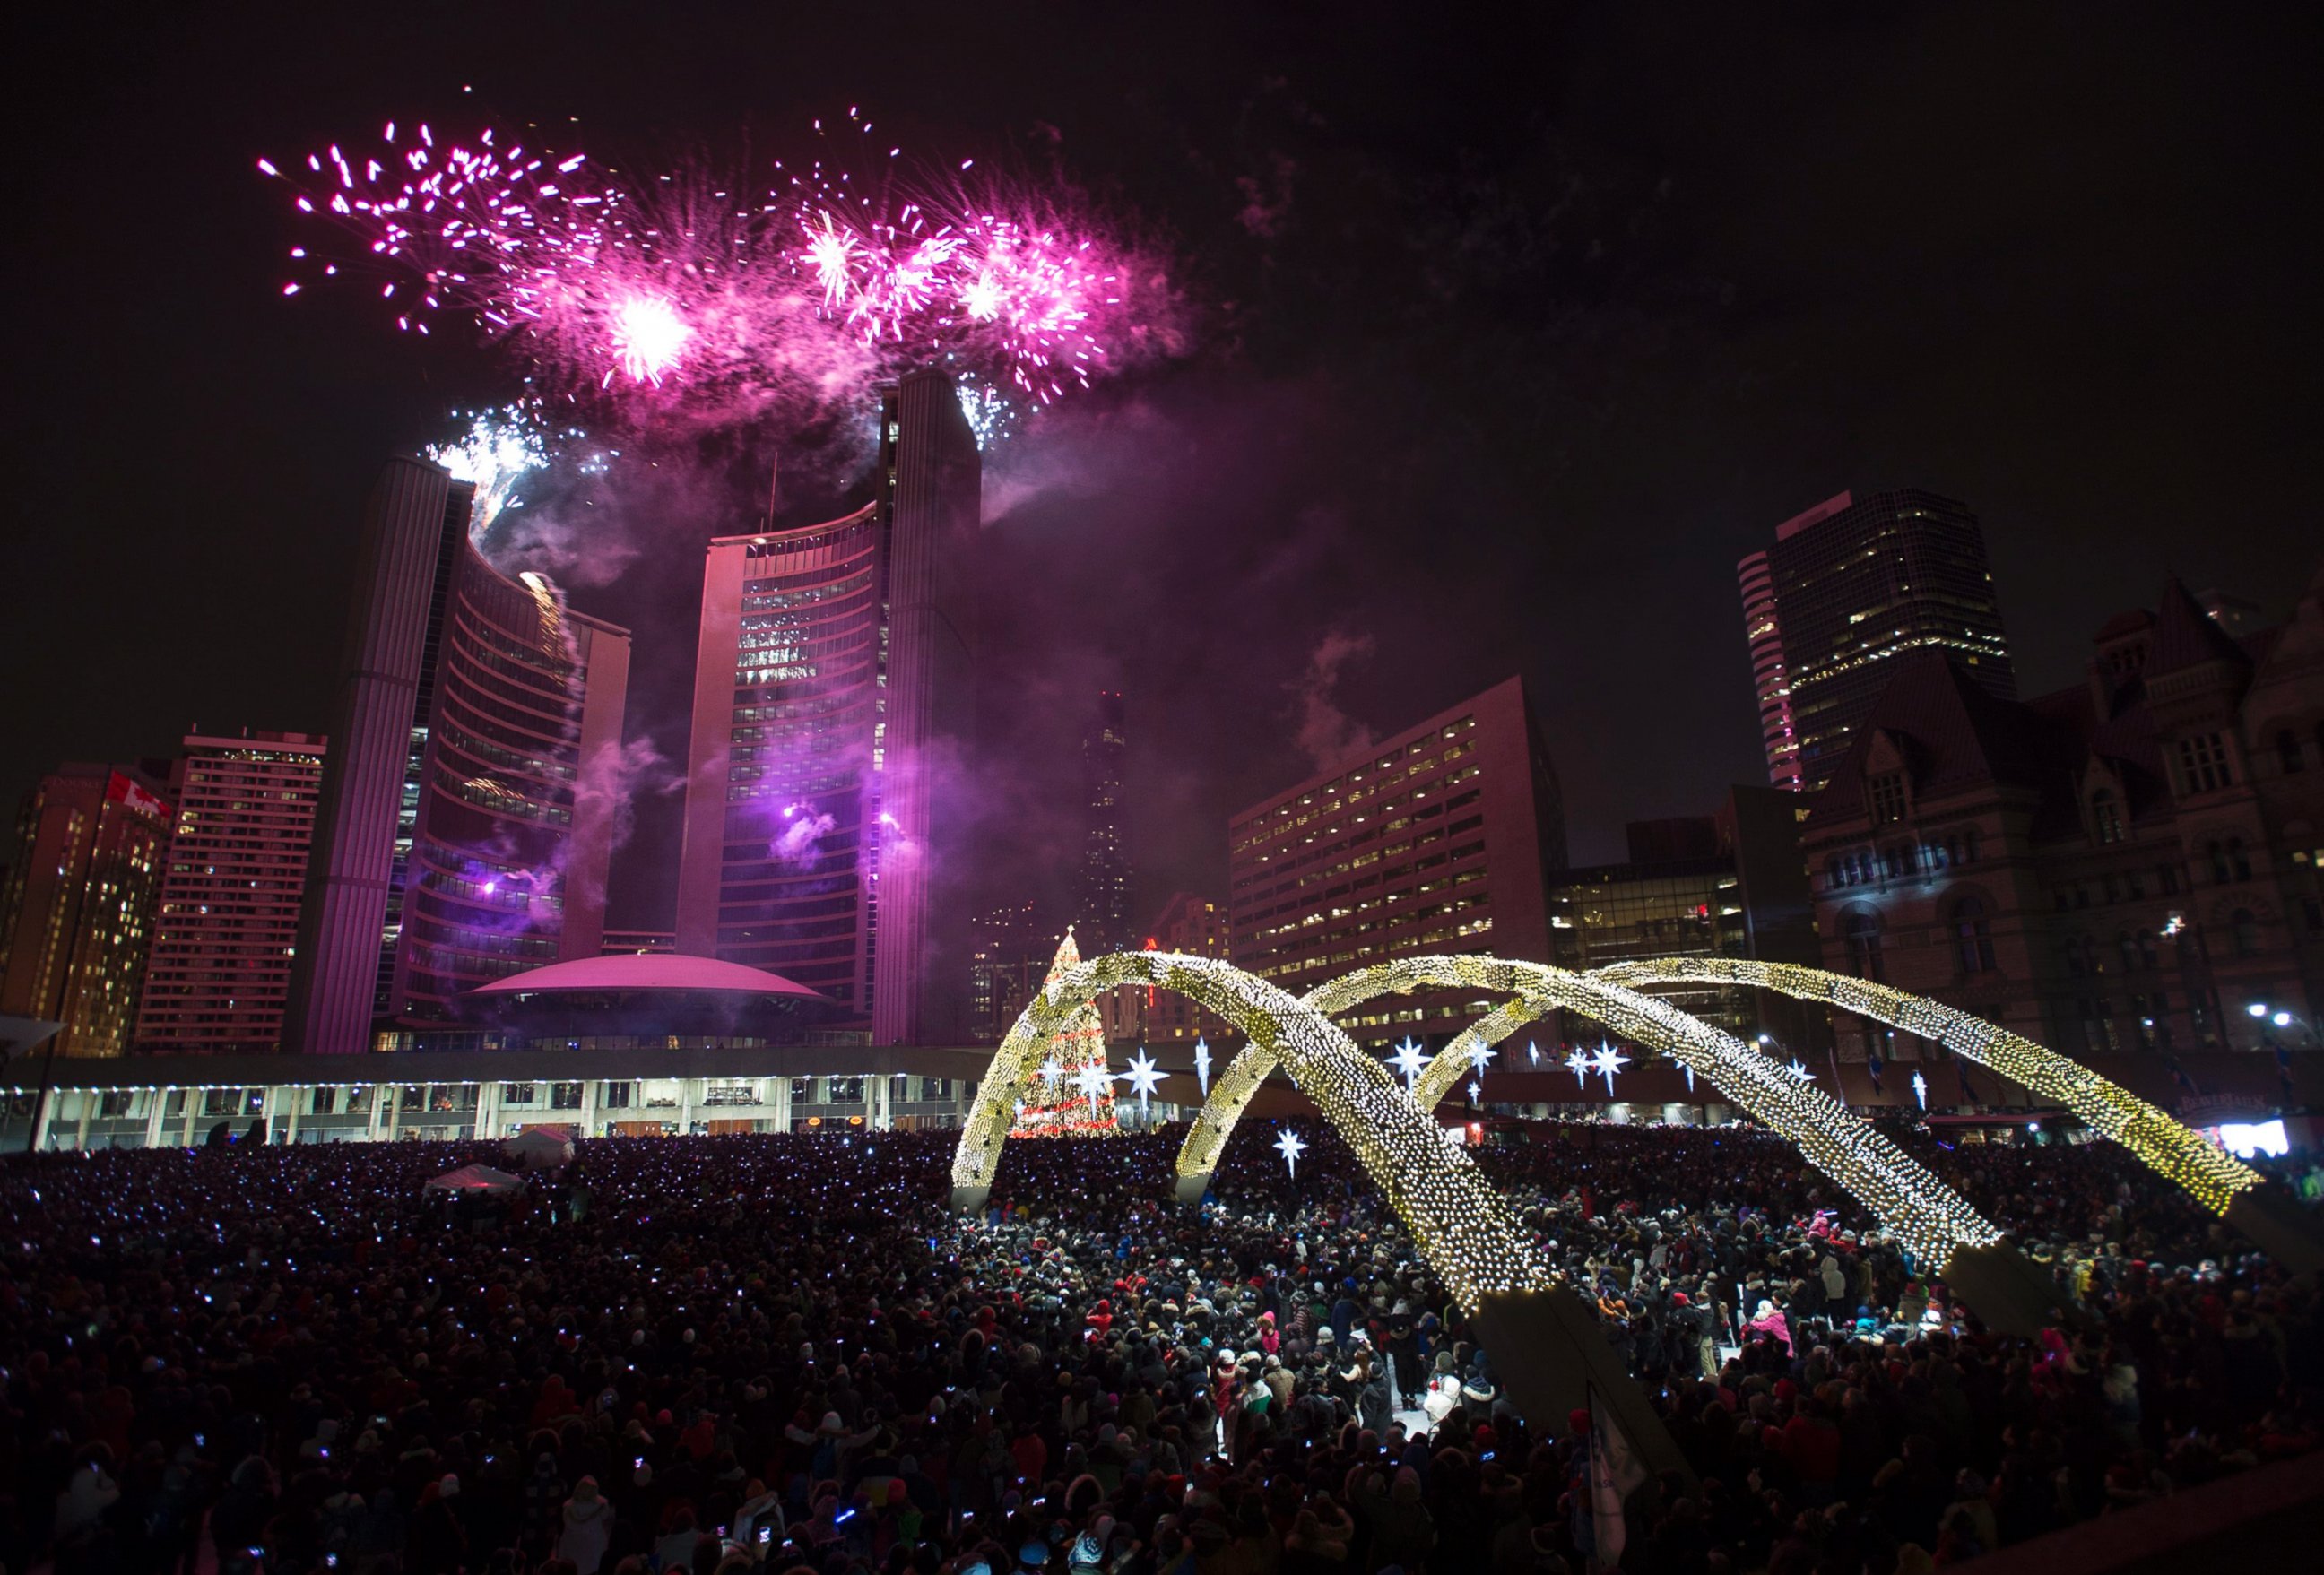 Fireworks explode in front of City Hall as revelers pack Nathan Phillips Square for New Year's celebrations in Toronto on Thursday, Jan. 1, 2015.